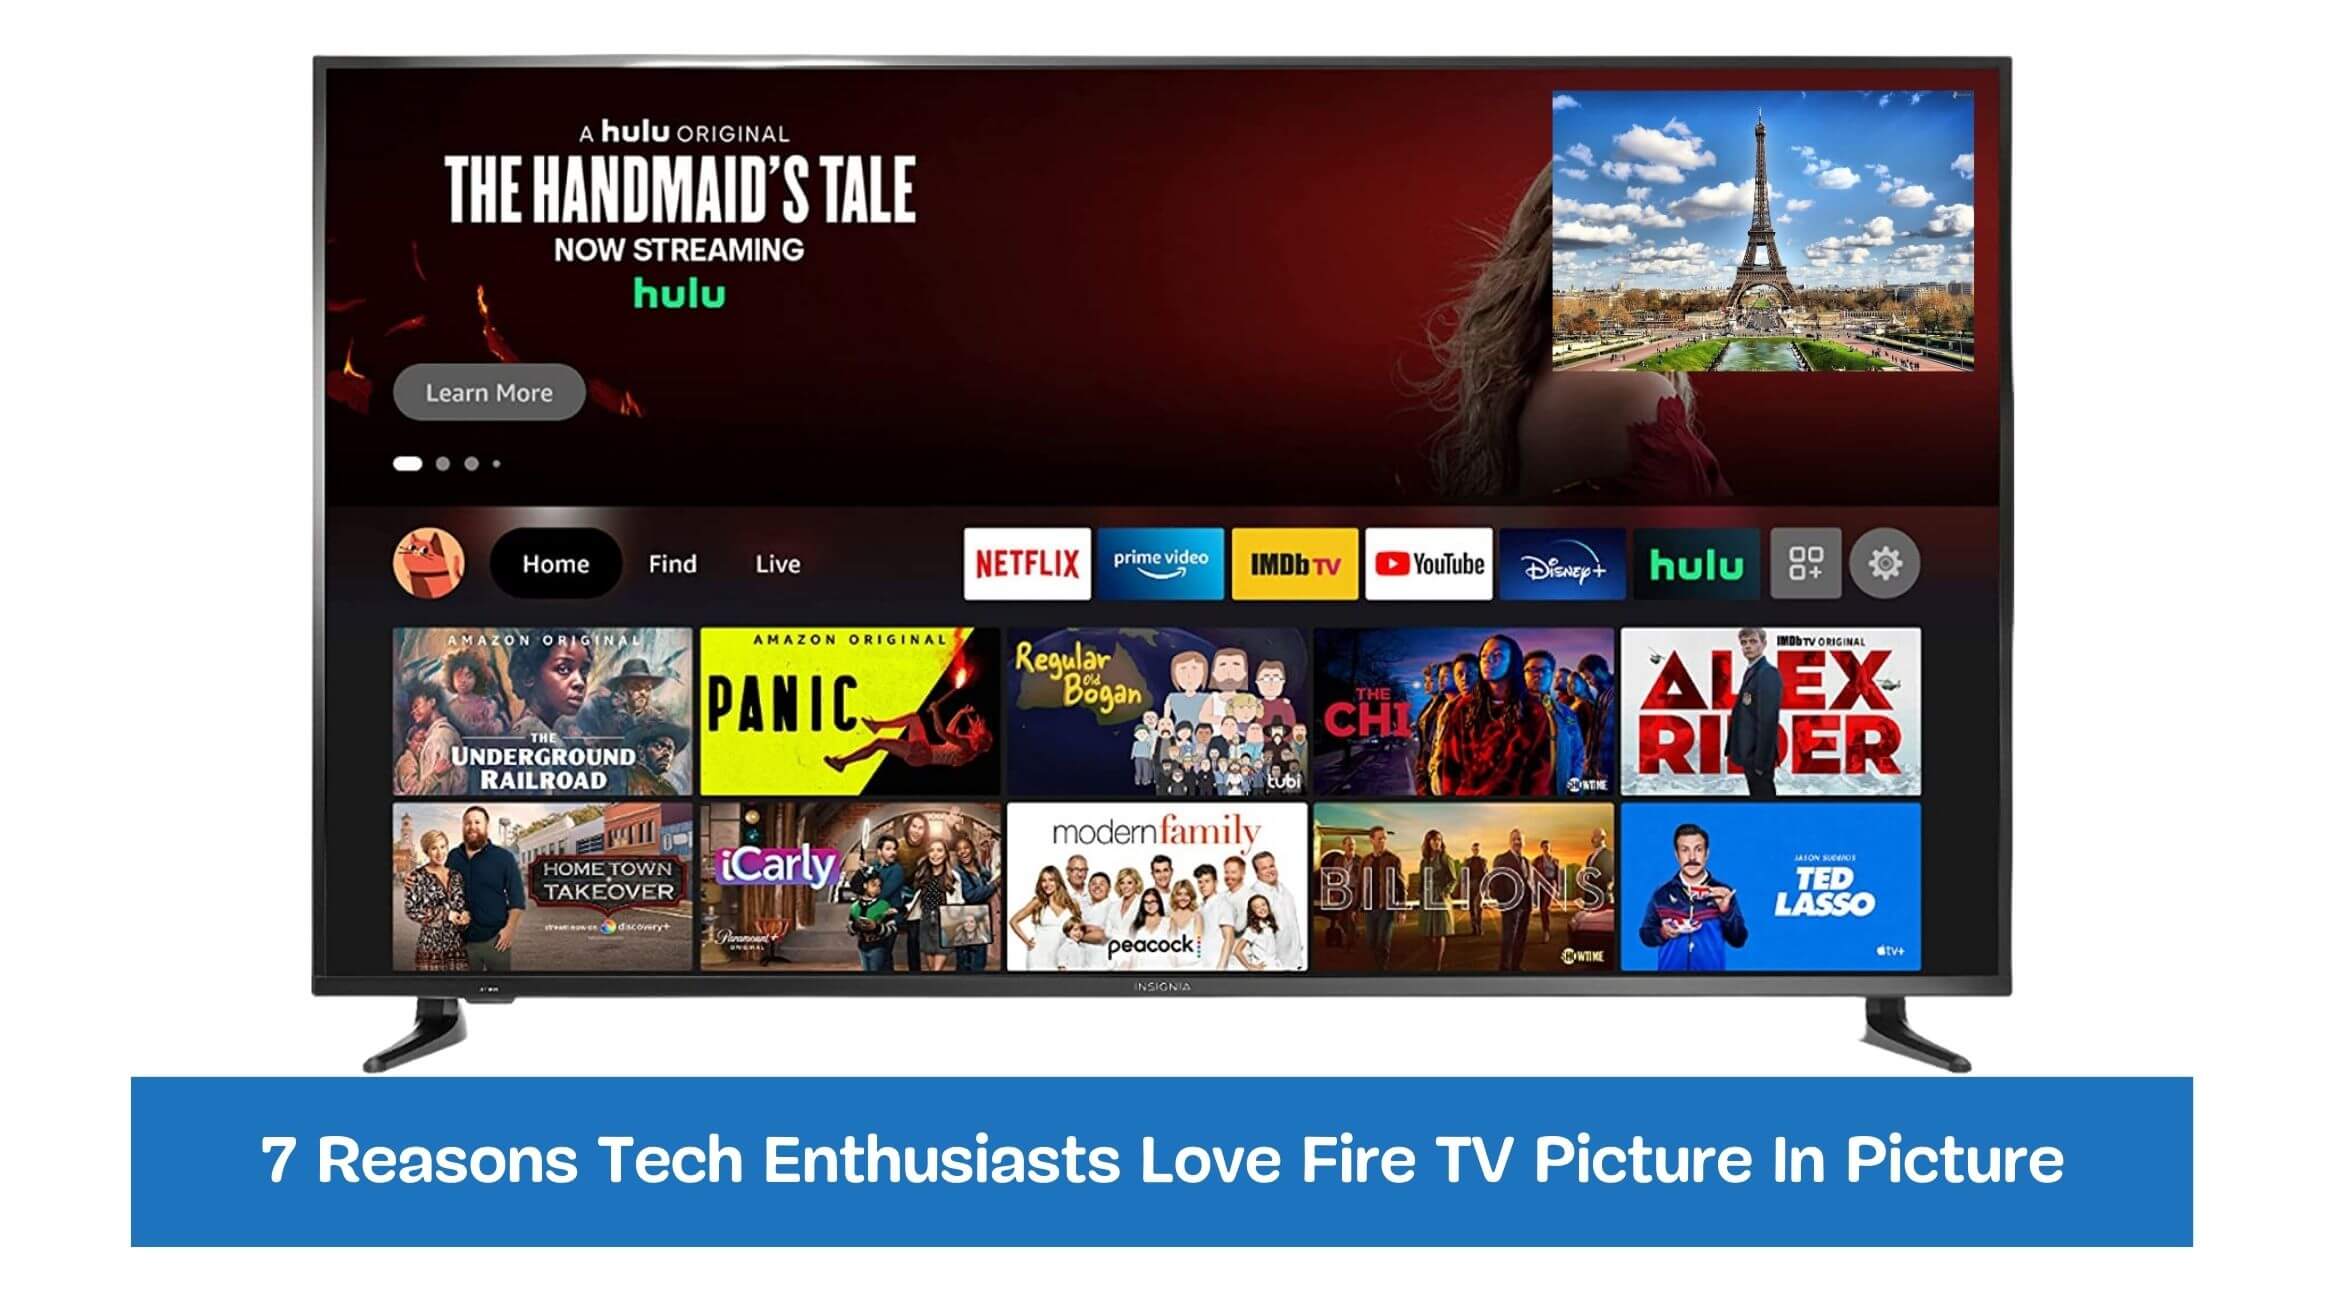 7 Reasons Tech Enthusiasts Love Fire TV Picture In Picture